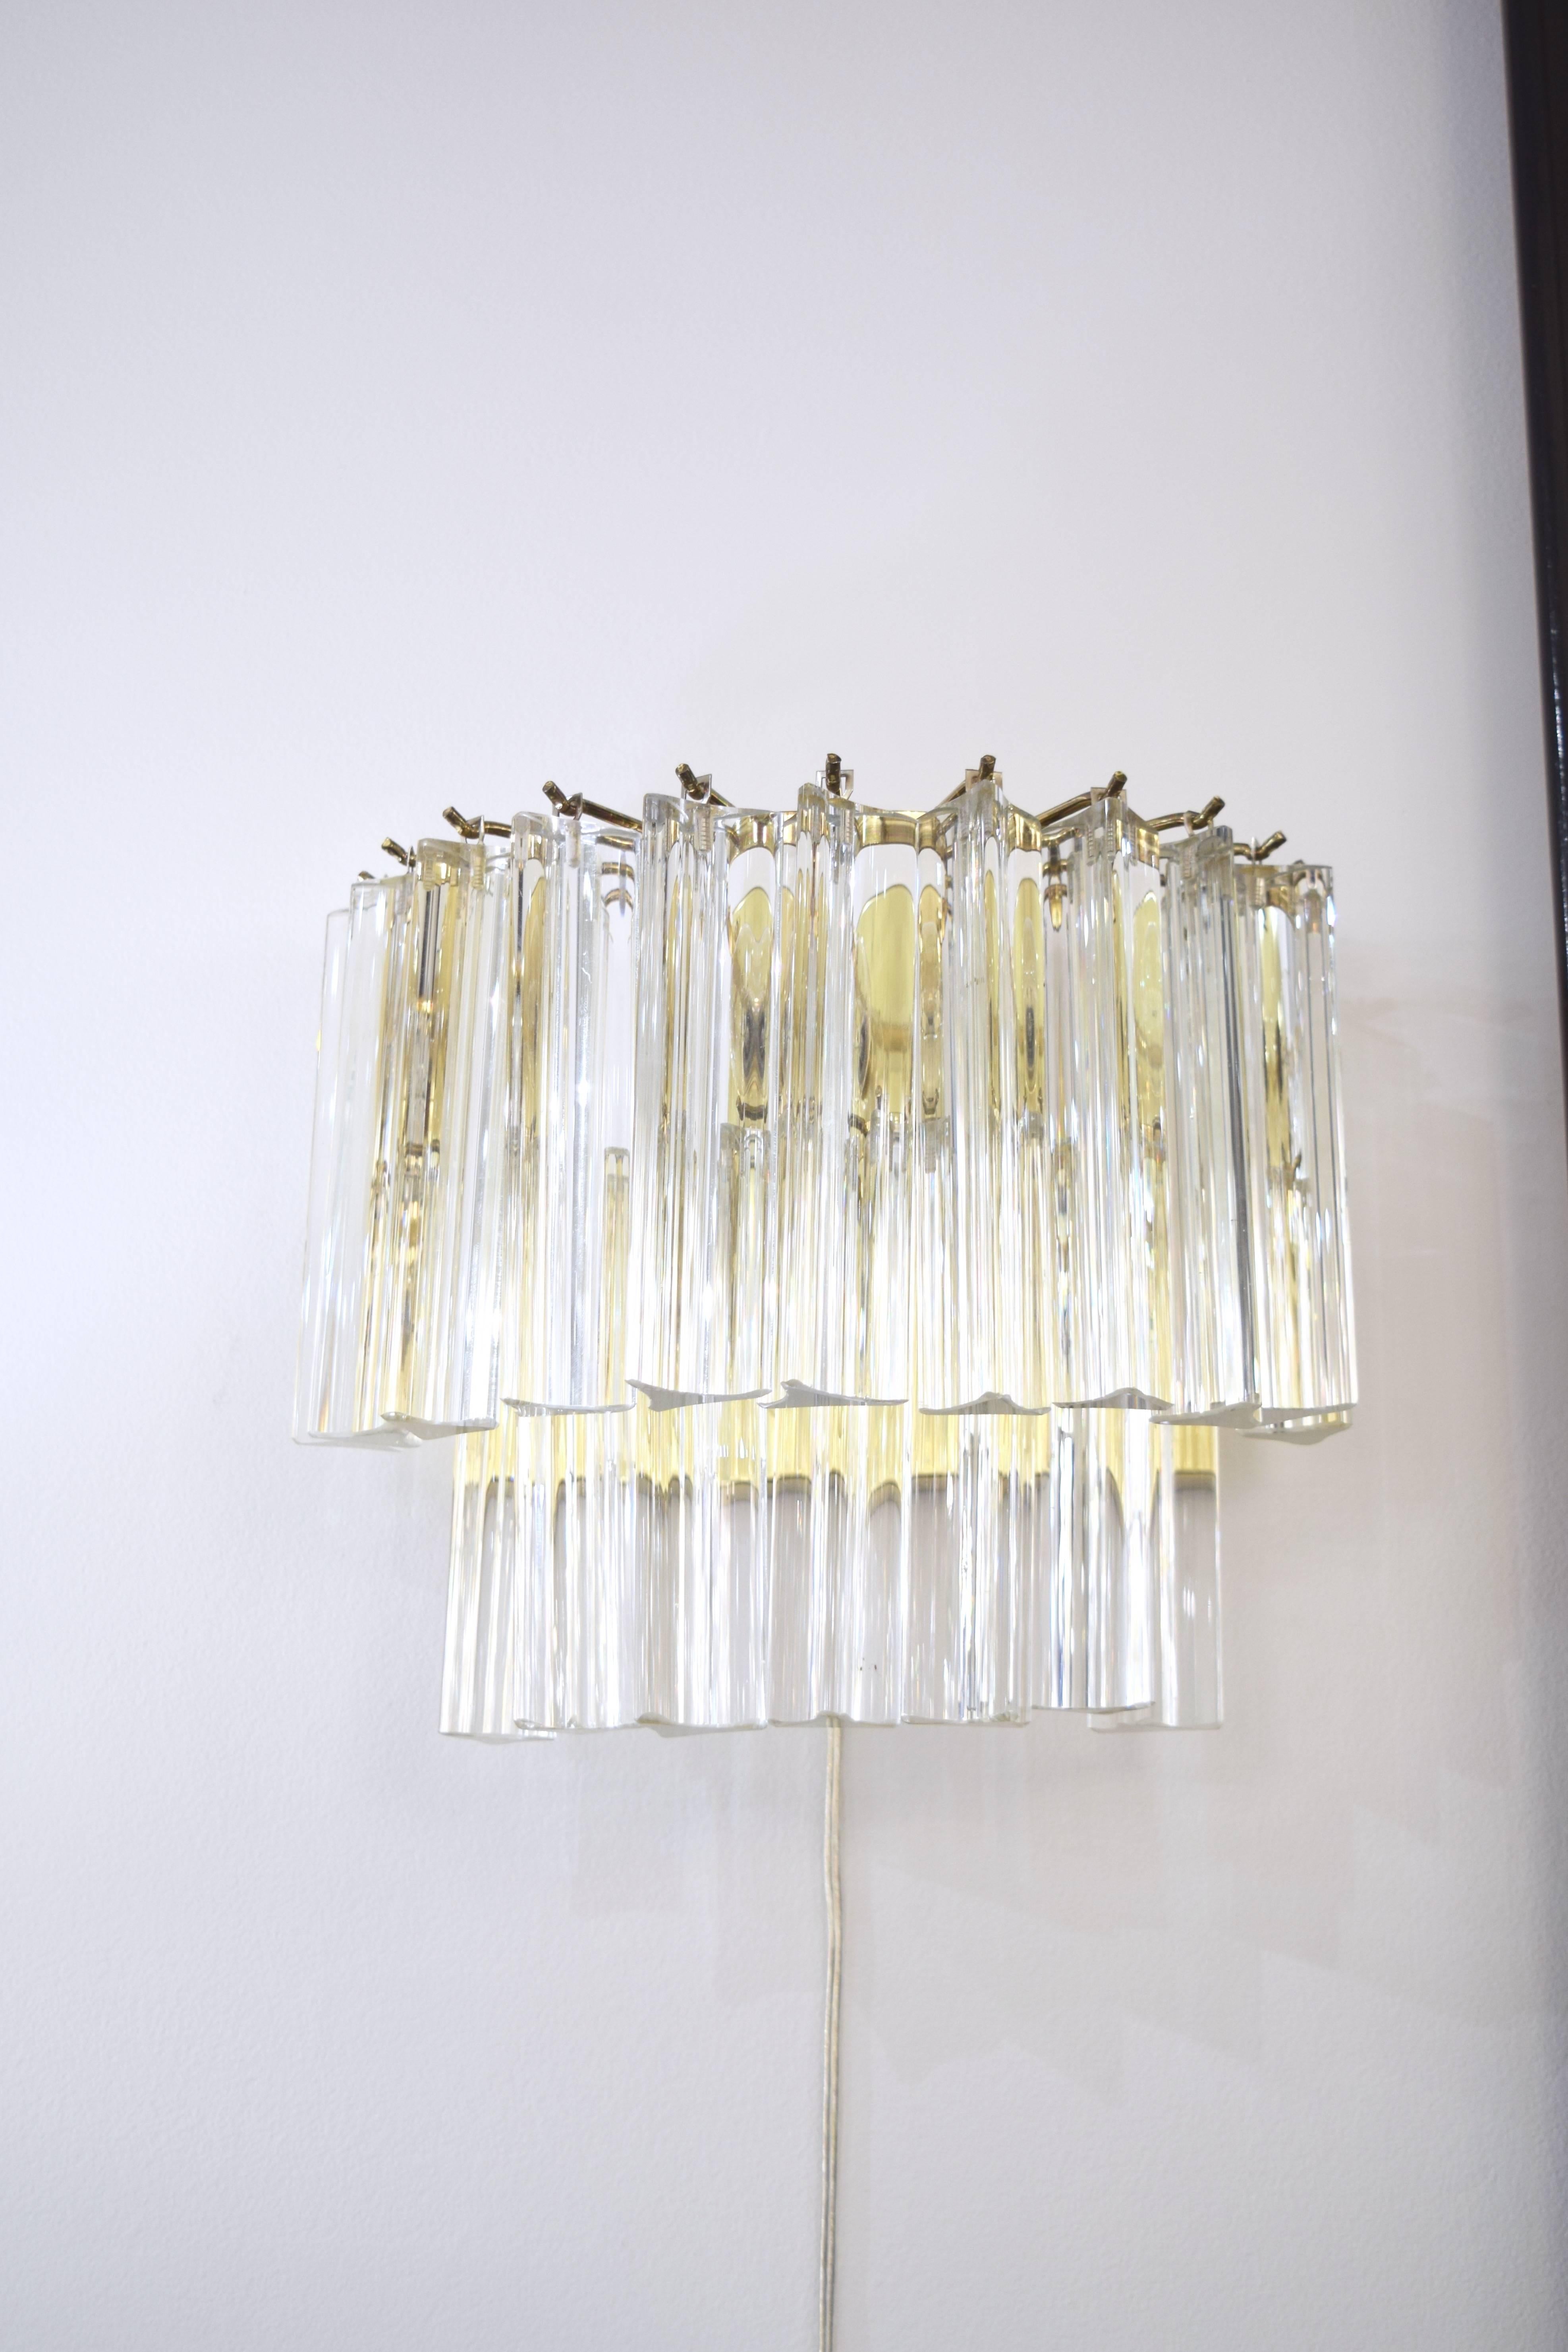 Pair of Italian sconces by Venini with two tiers of hanging glass prisms with a brass frame featuring three sockets.